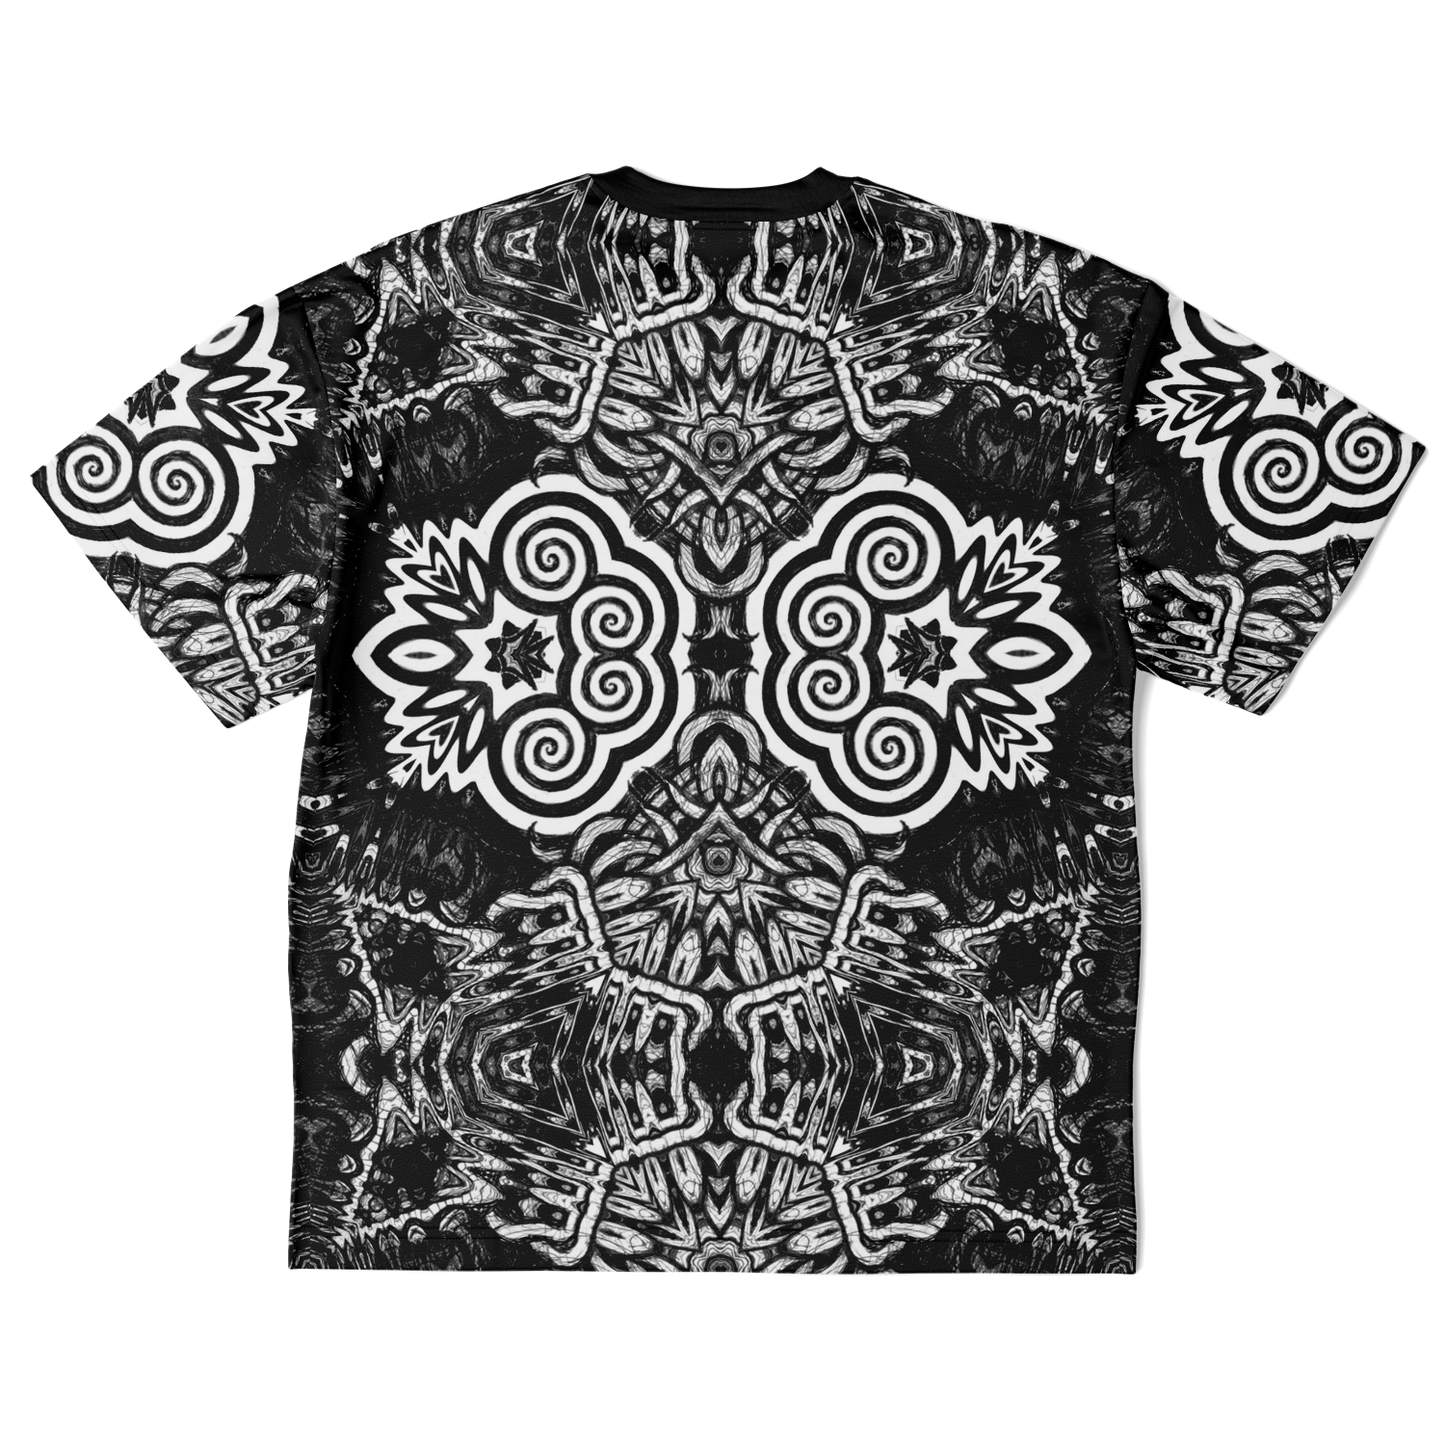 Madness in B&W Flipped T Shirt, More To Love Sizes